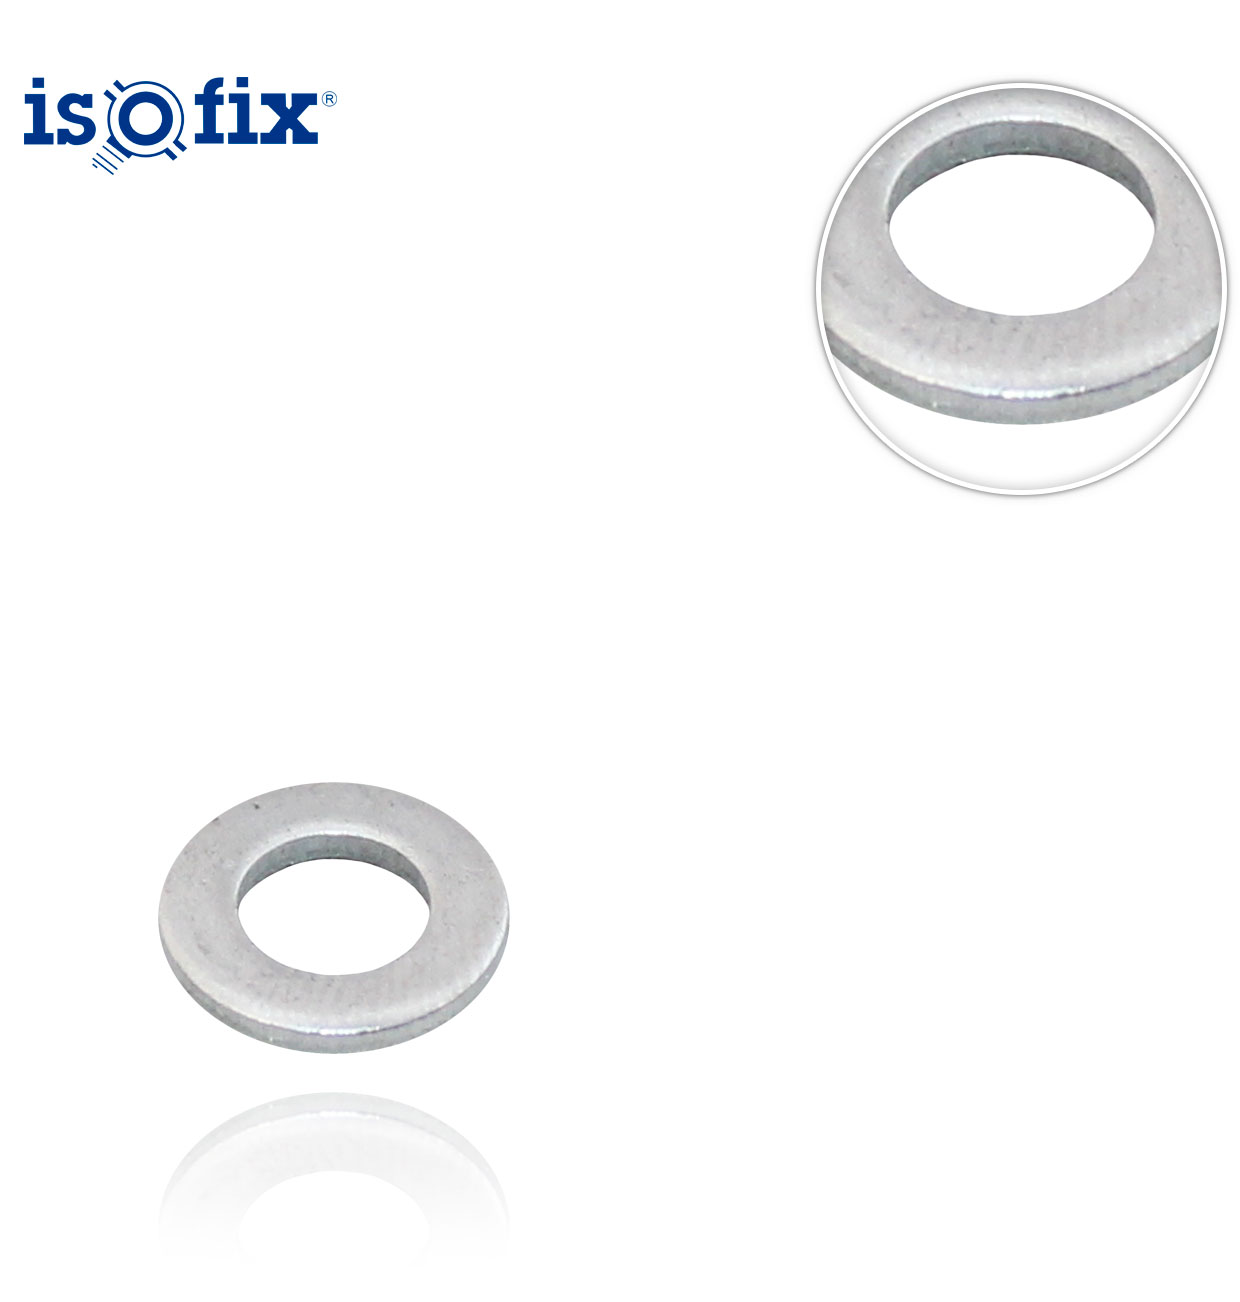 M-6 ** ZINC-PLATED HEX FLAT WASHER